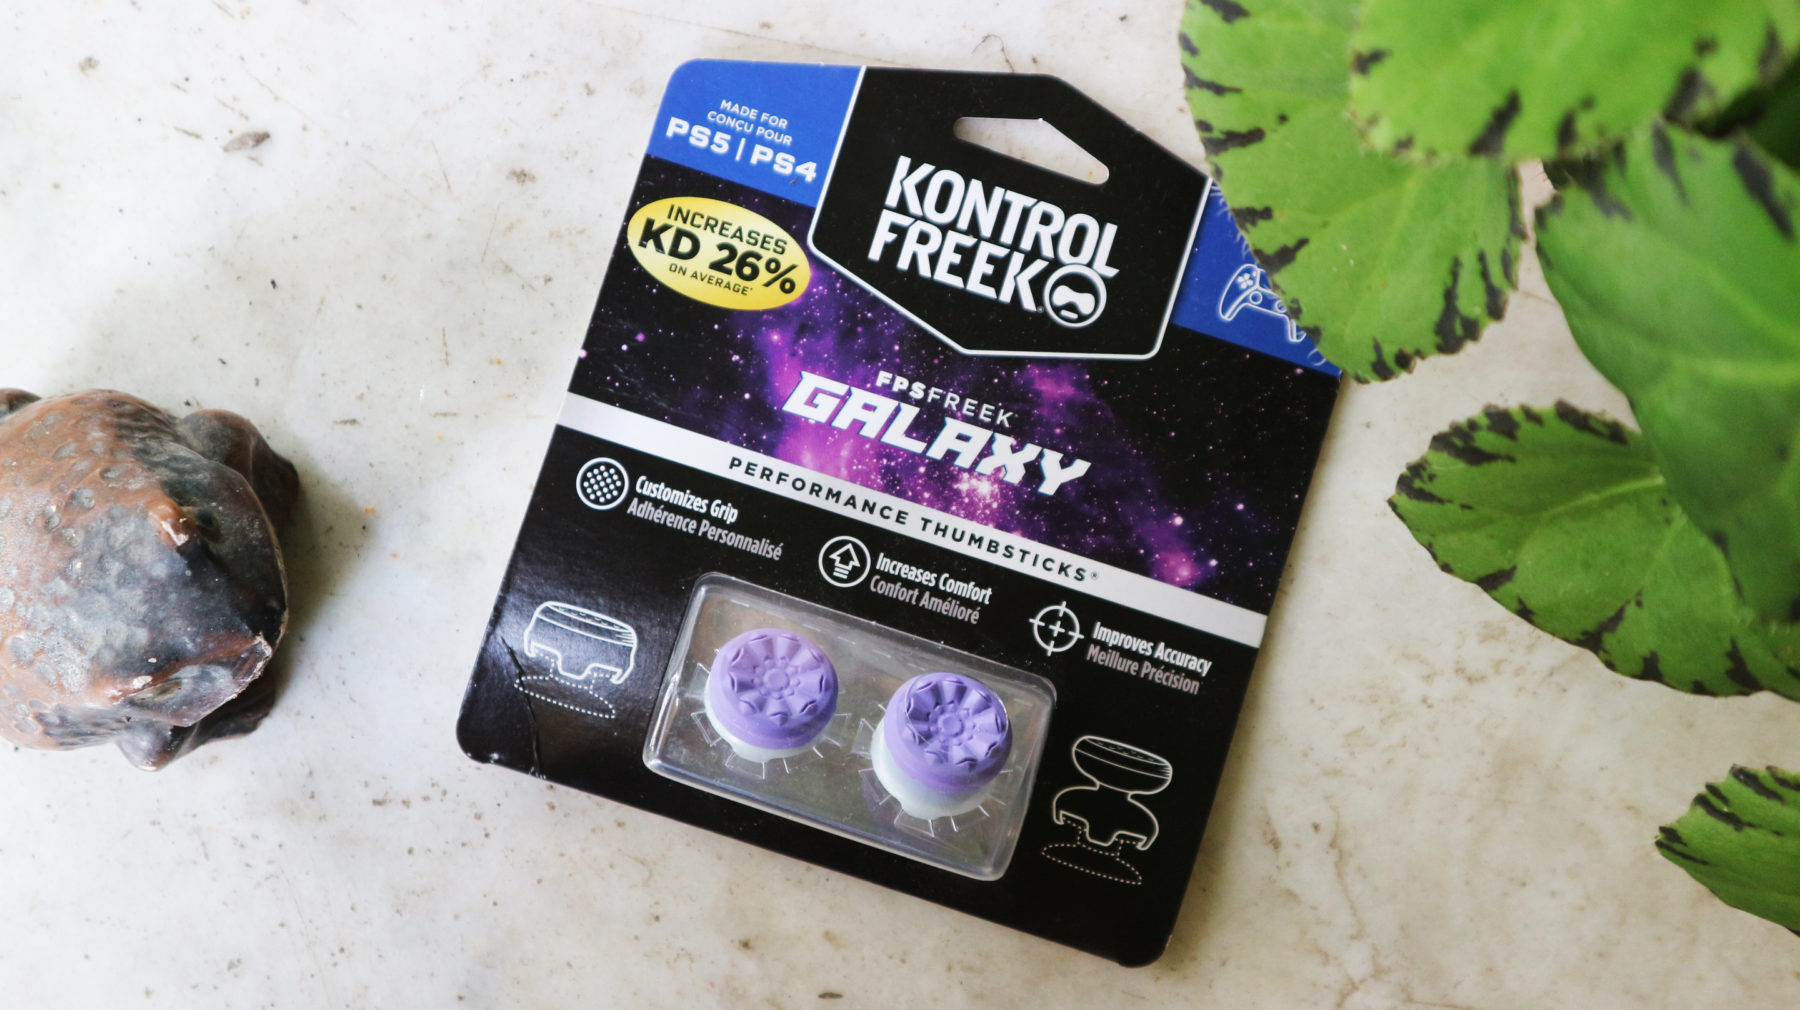 KontrolFreek FPS Freek Galaxy Performance Thumbsticks Unboxing and Overview -